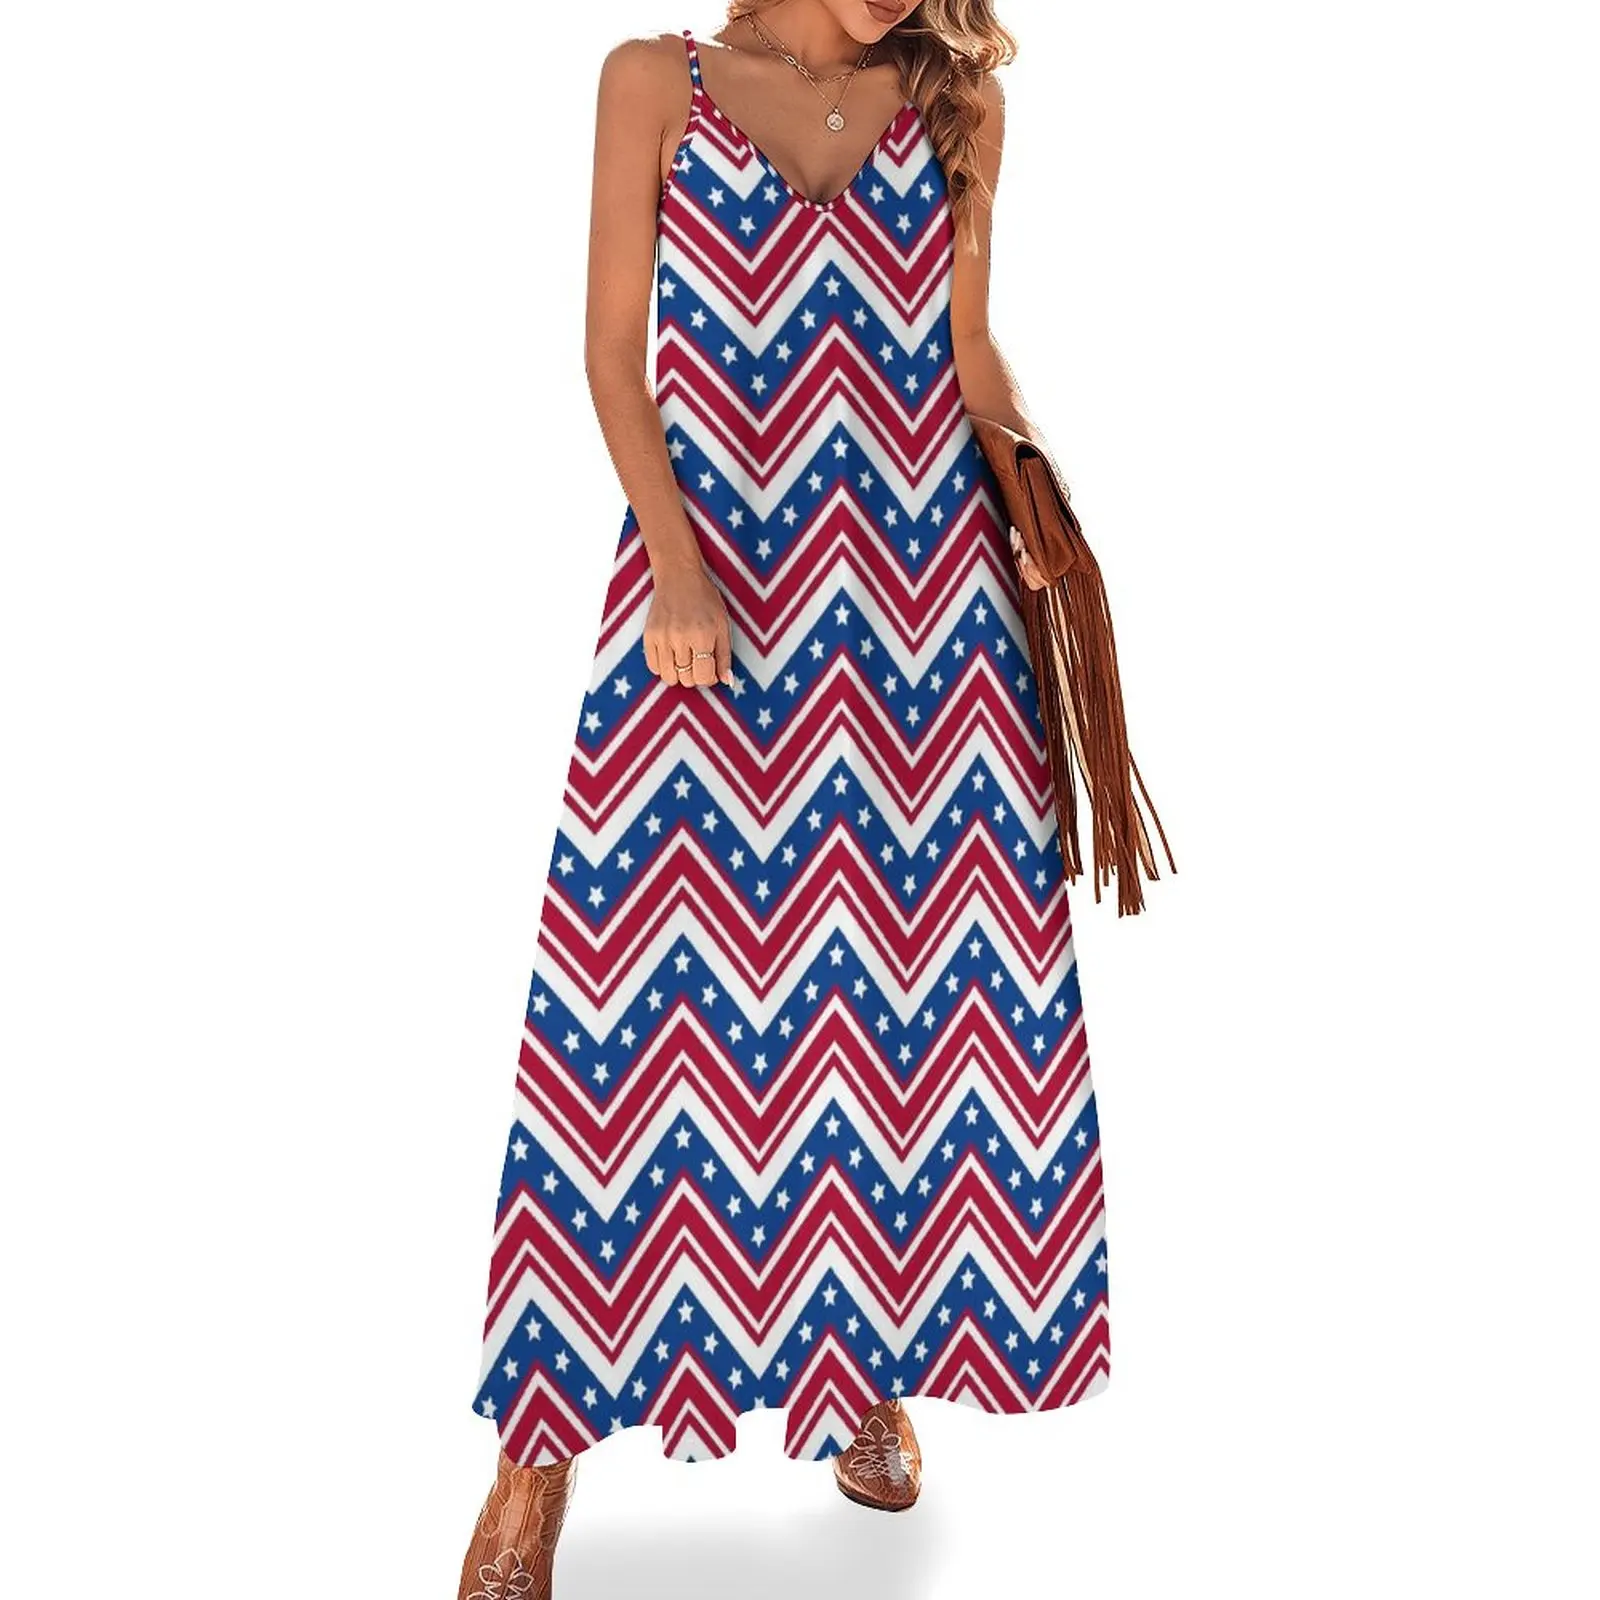 

Red White and Blue Zigzag Stripes with Stars Sleeveless Dress loose women's dress dress for women summer